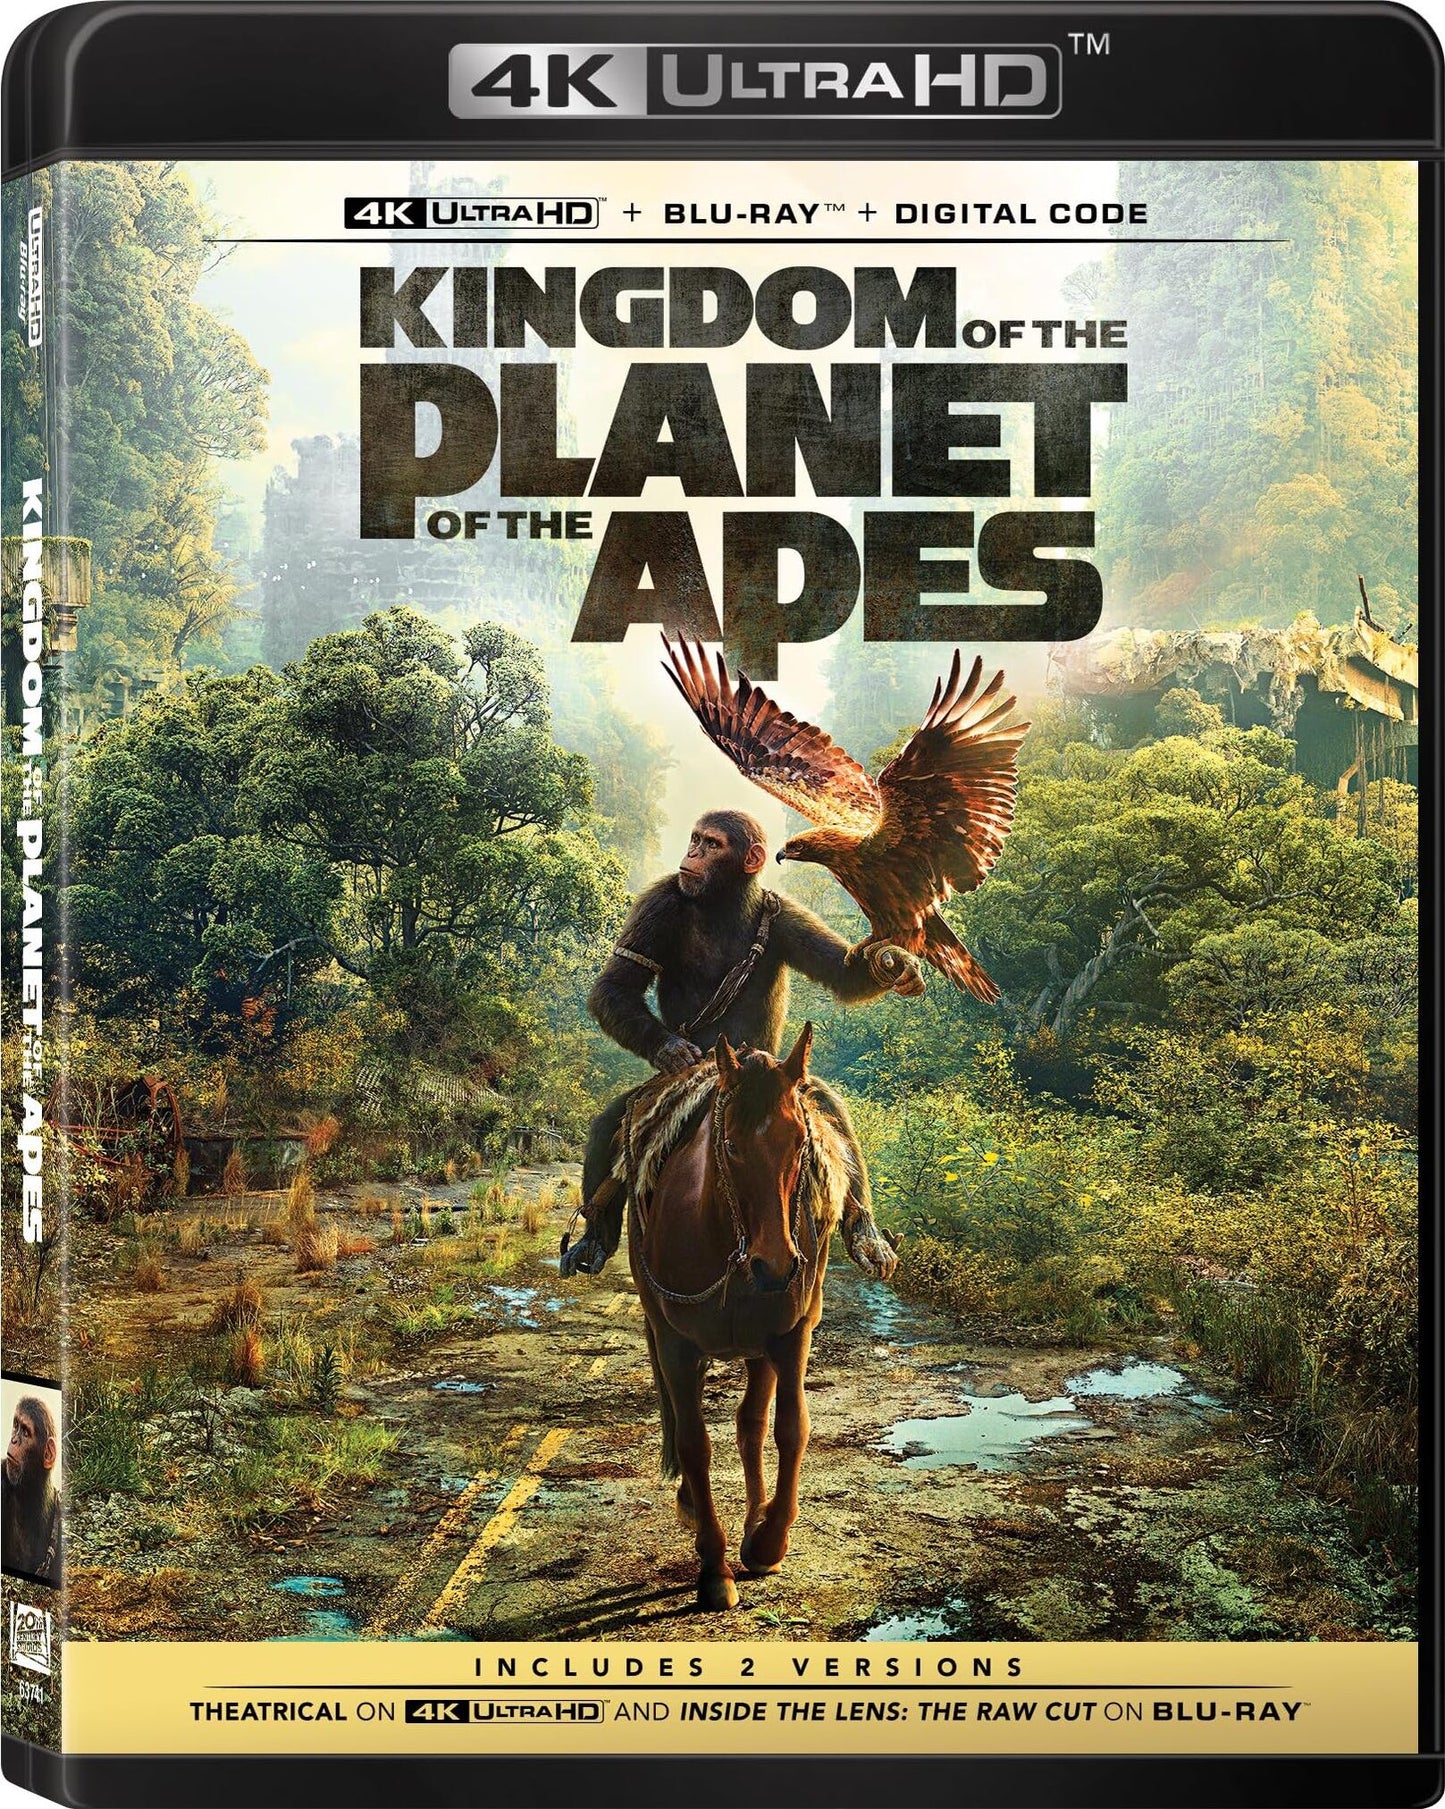 Kingdom of the Planet of the Apes [4K UHD] [UK]